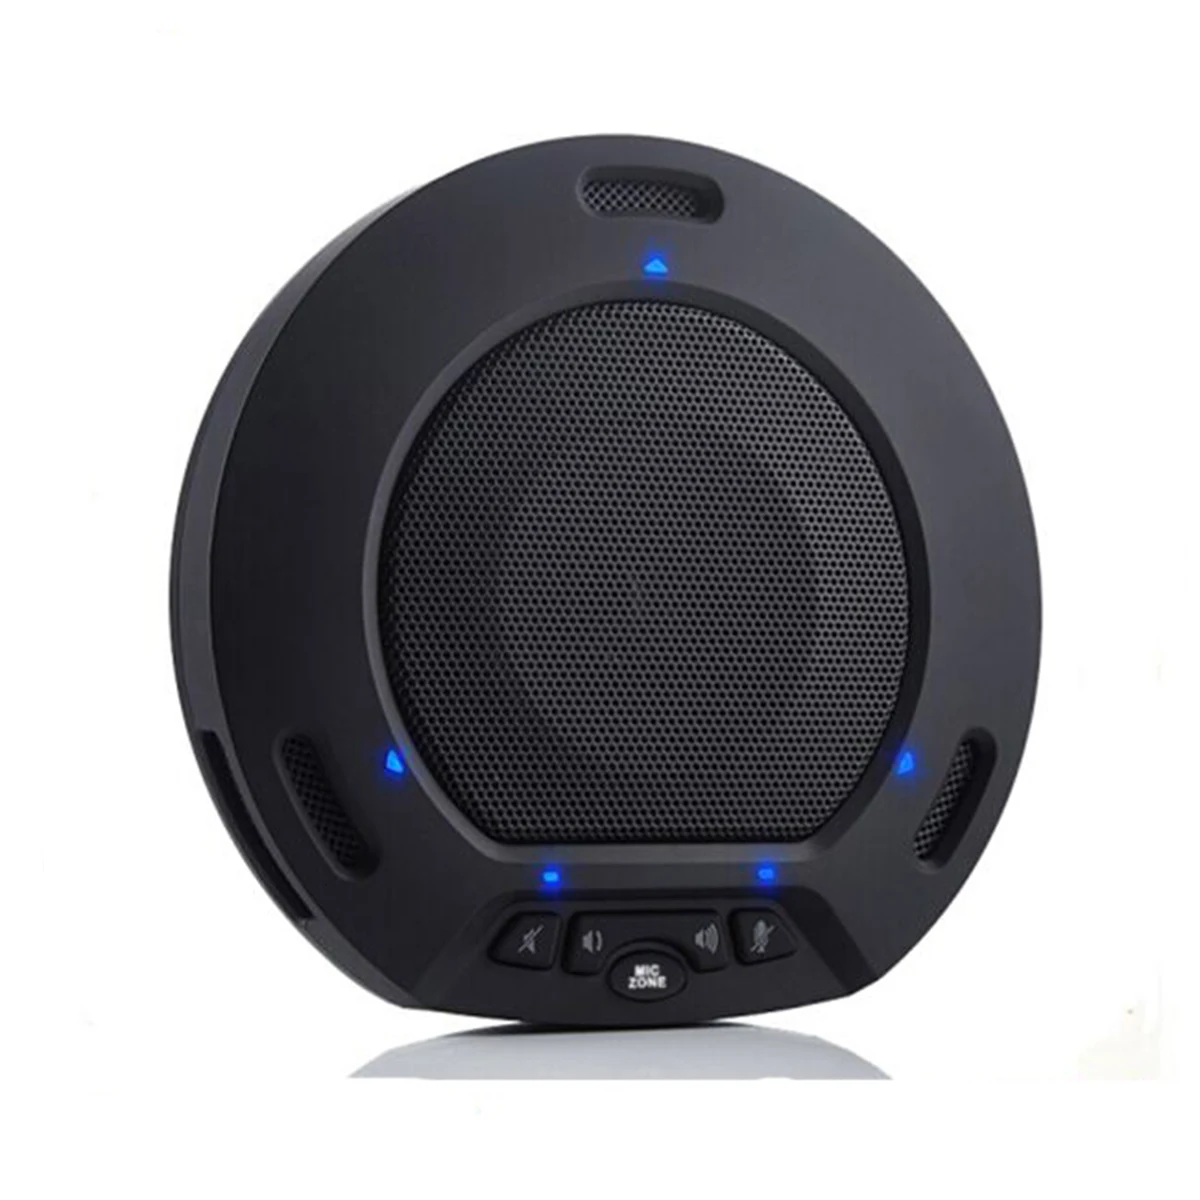 high quality hot selling USB conference speakerphone microphone  360 degree omni-directional